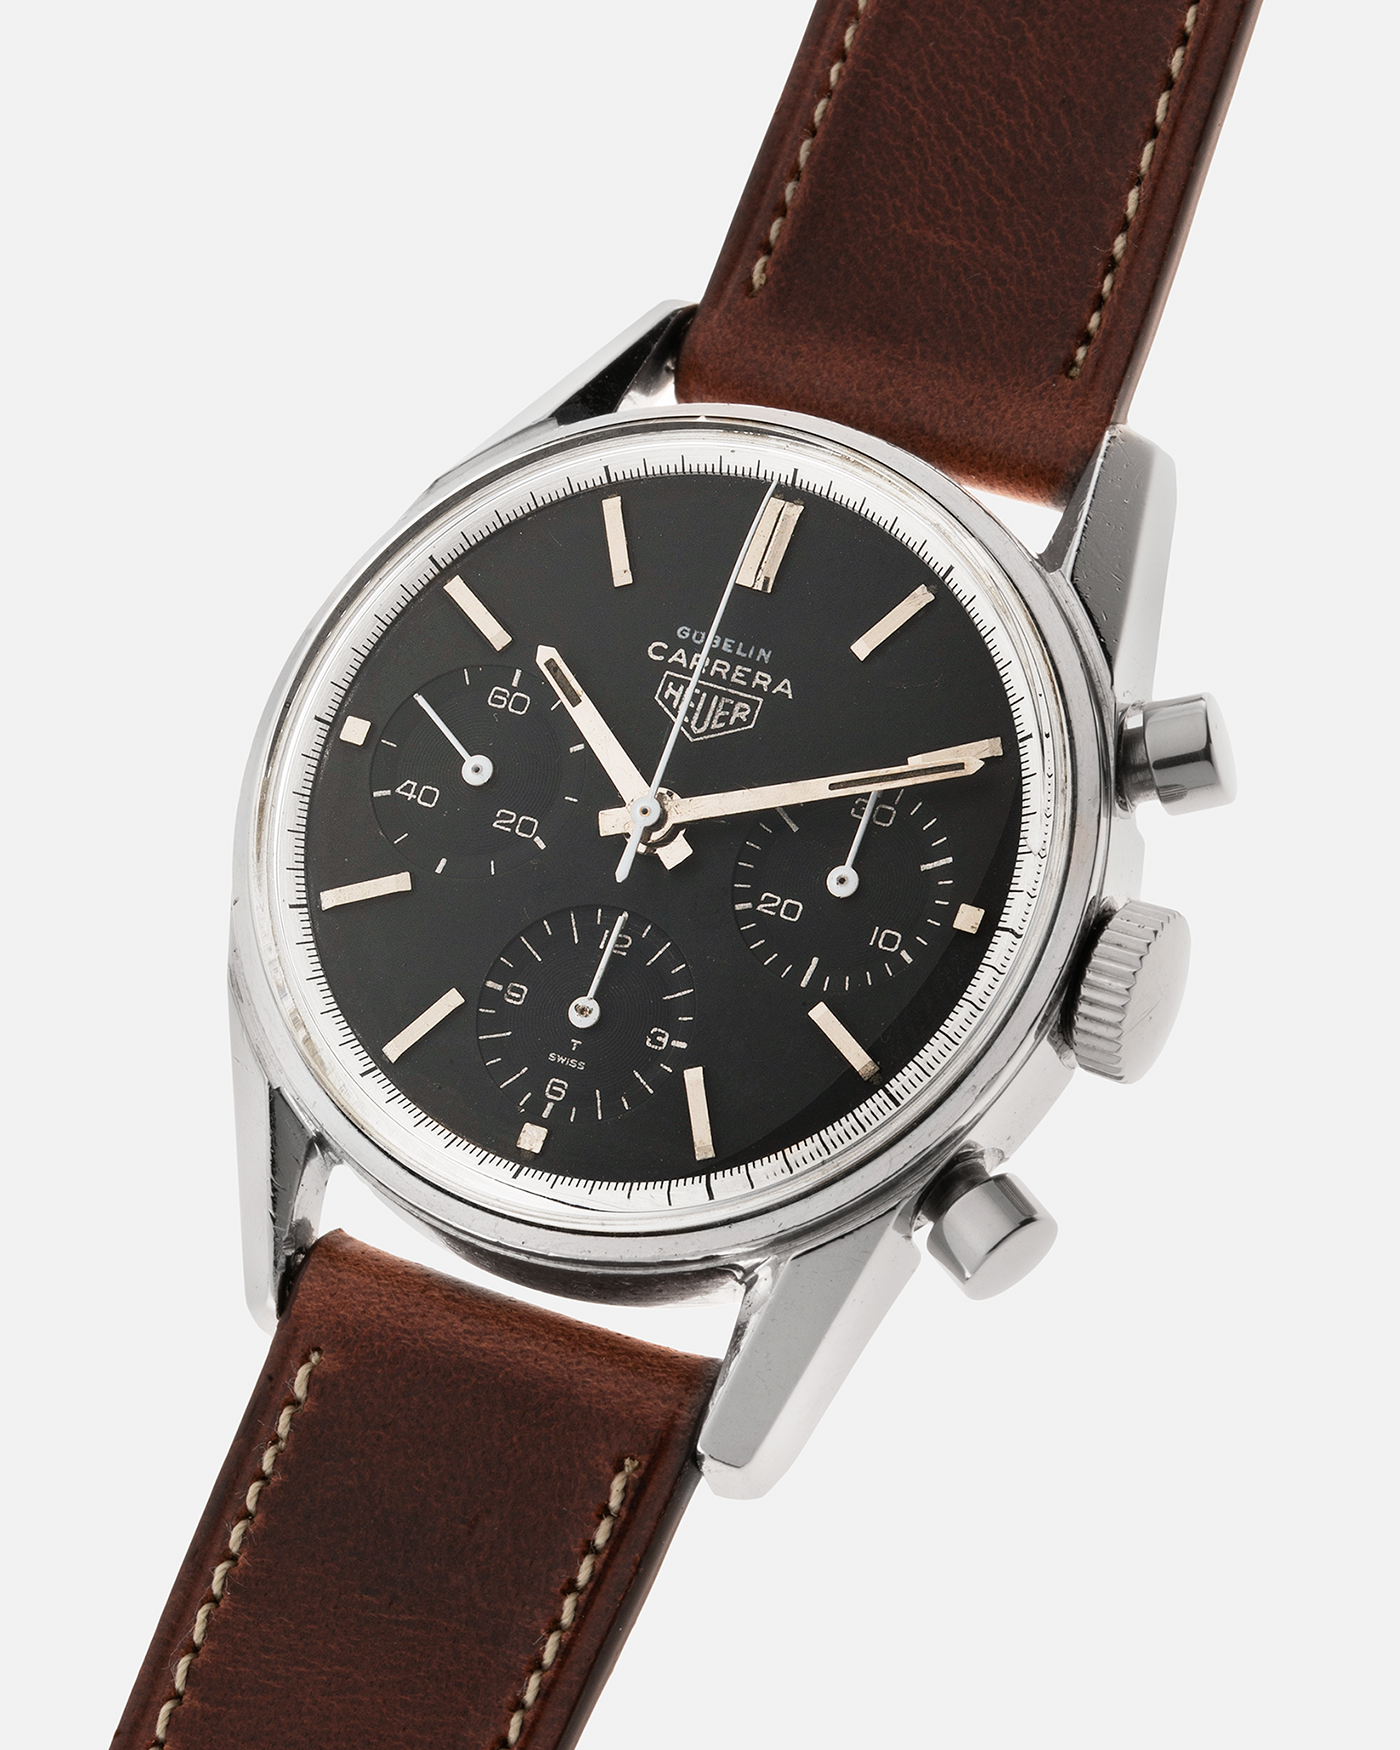 Brand: Heuer Year: 1960’s Model: Carrera Reference Number: 2447N Serial Number: 69XXX Material: Stainless Steel Movement: Valjoux 72 Case Diameter: 36mm Lug Width: 18mm Strap: Nostime Medium Brown Calf Leather Strap with Stainless Steel Tang Buckle